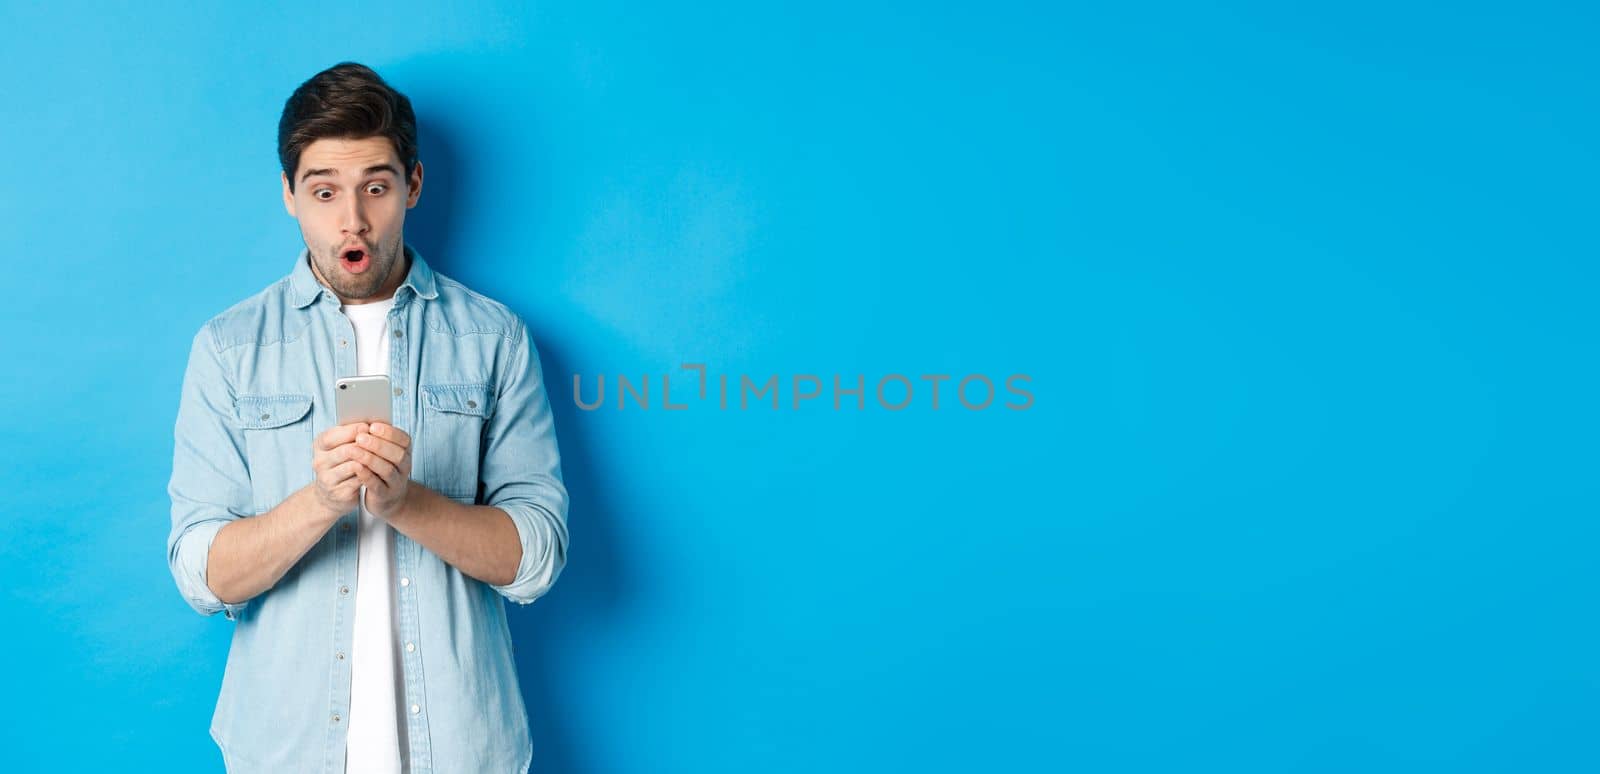 Man looking amazed while checking promo on smartphone, looking surprised at phone, standing against blue background.